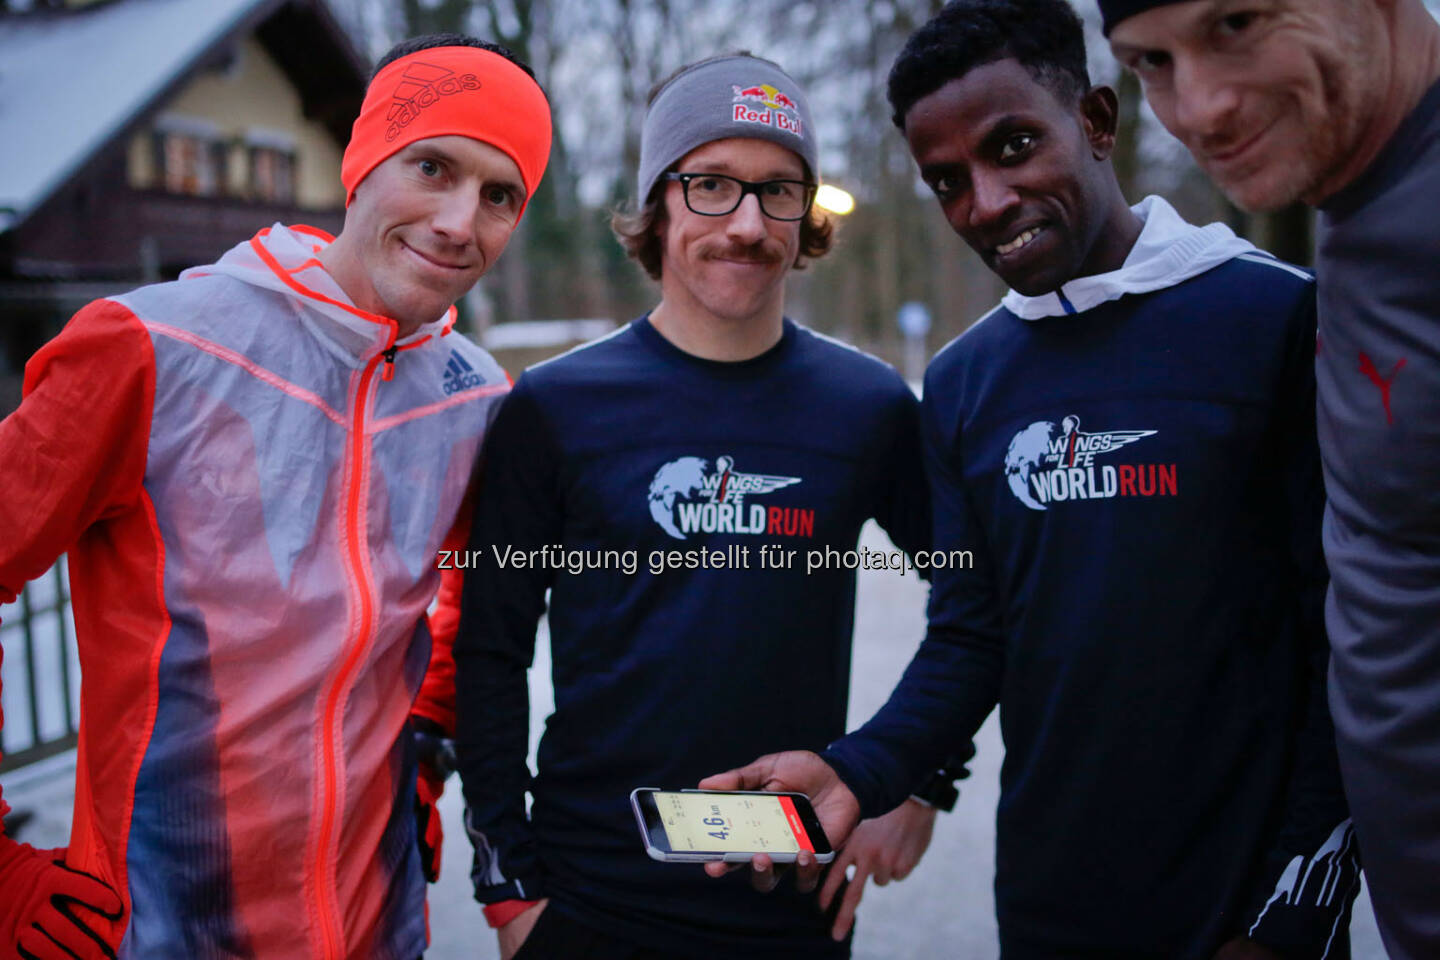 Florian Neuschwander ( middle ) and 
Lemawork Ketema ( 3rd from left ) with Werner Schrittwieser at the Wings for Life World Run event in Munich 23rd of January 2016 (Bild: Daniel Grund)